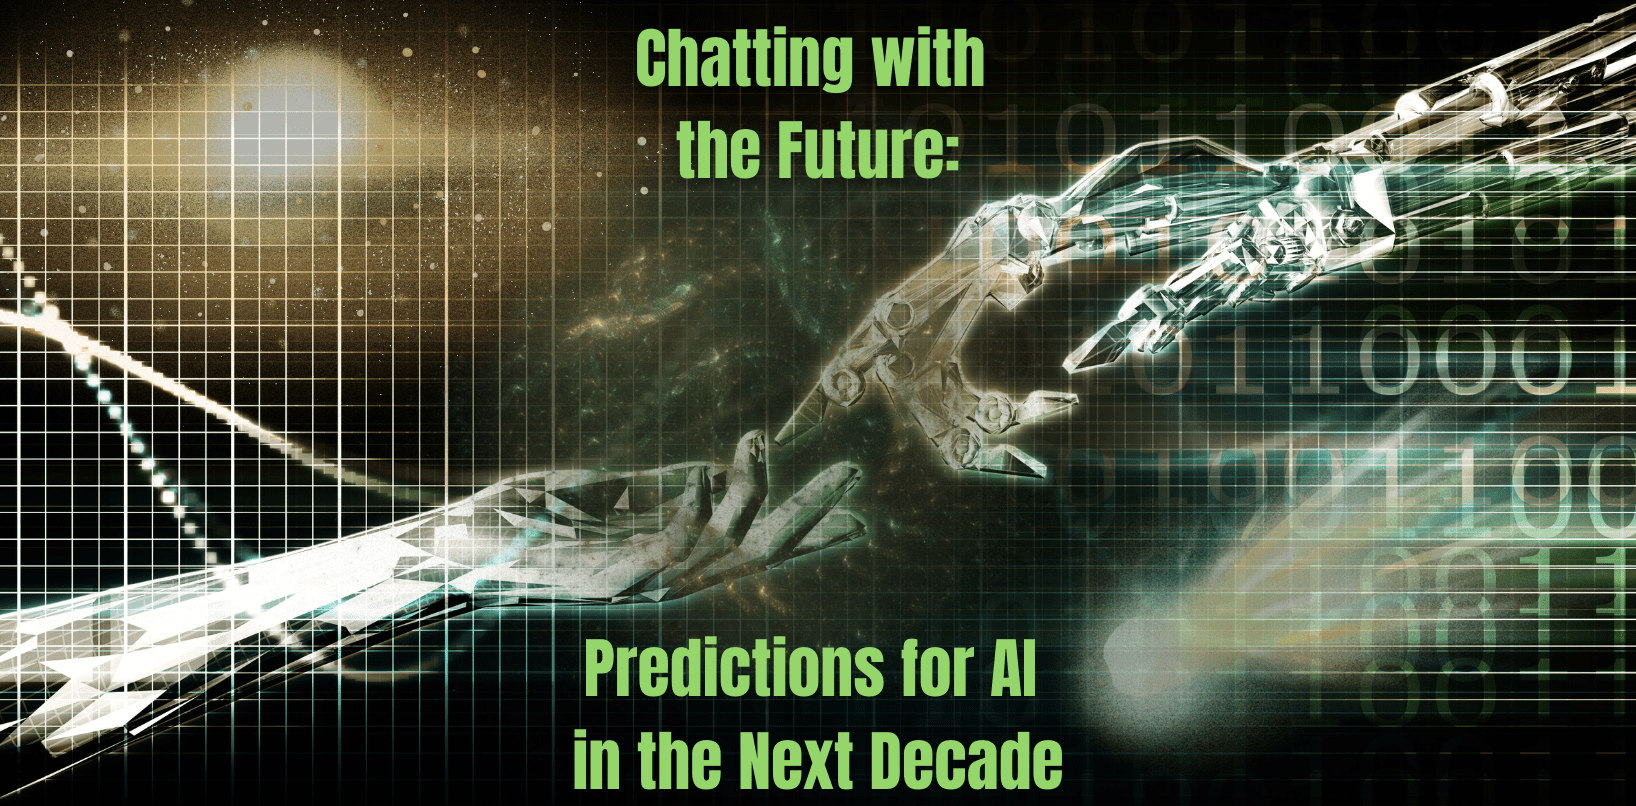 Chatting with the Future: Predictions for AI in the Next Decade